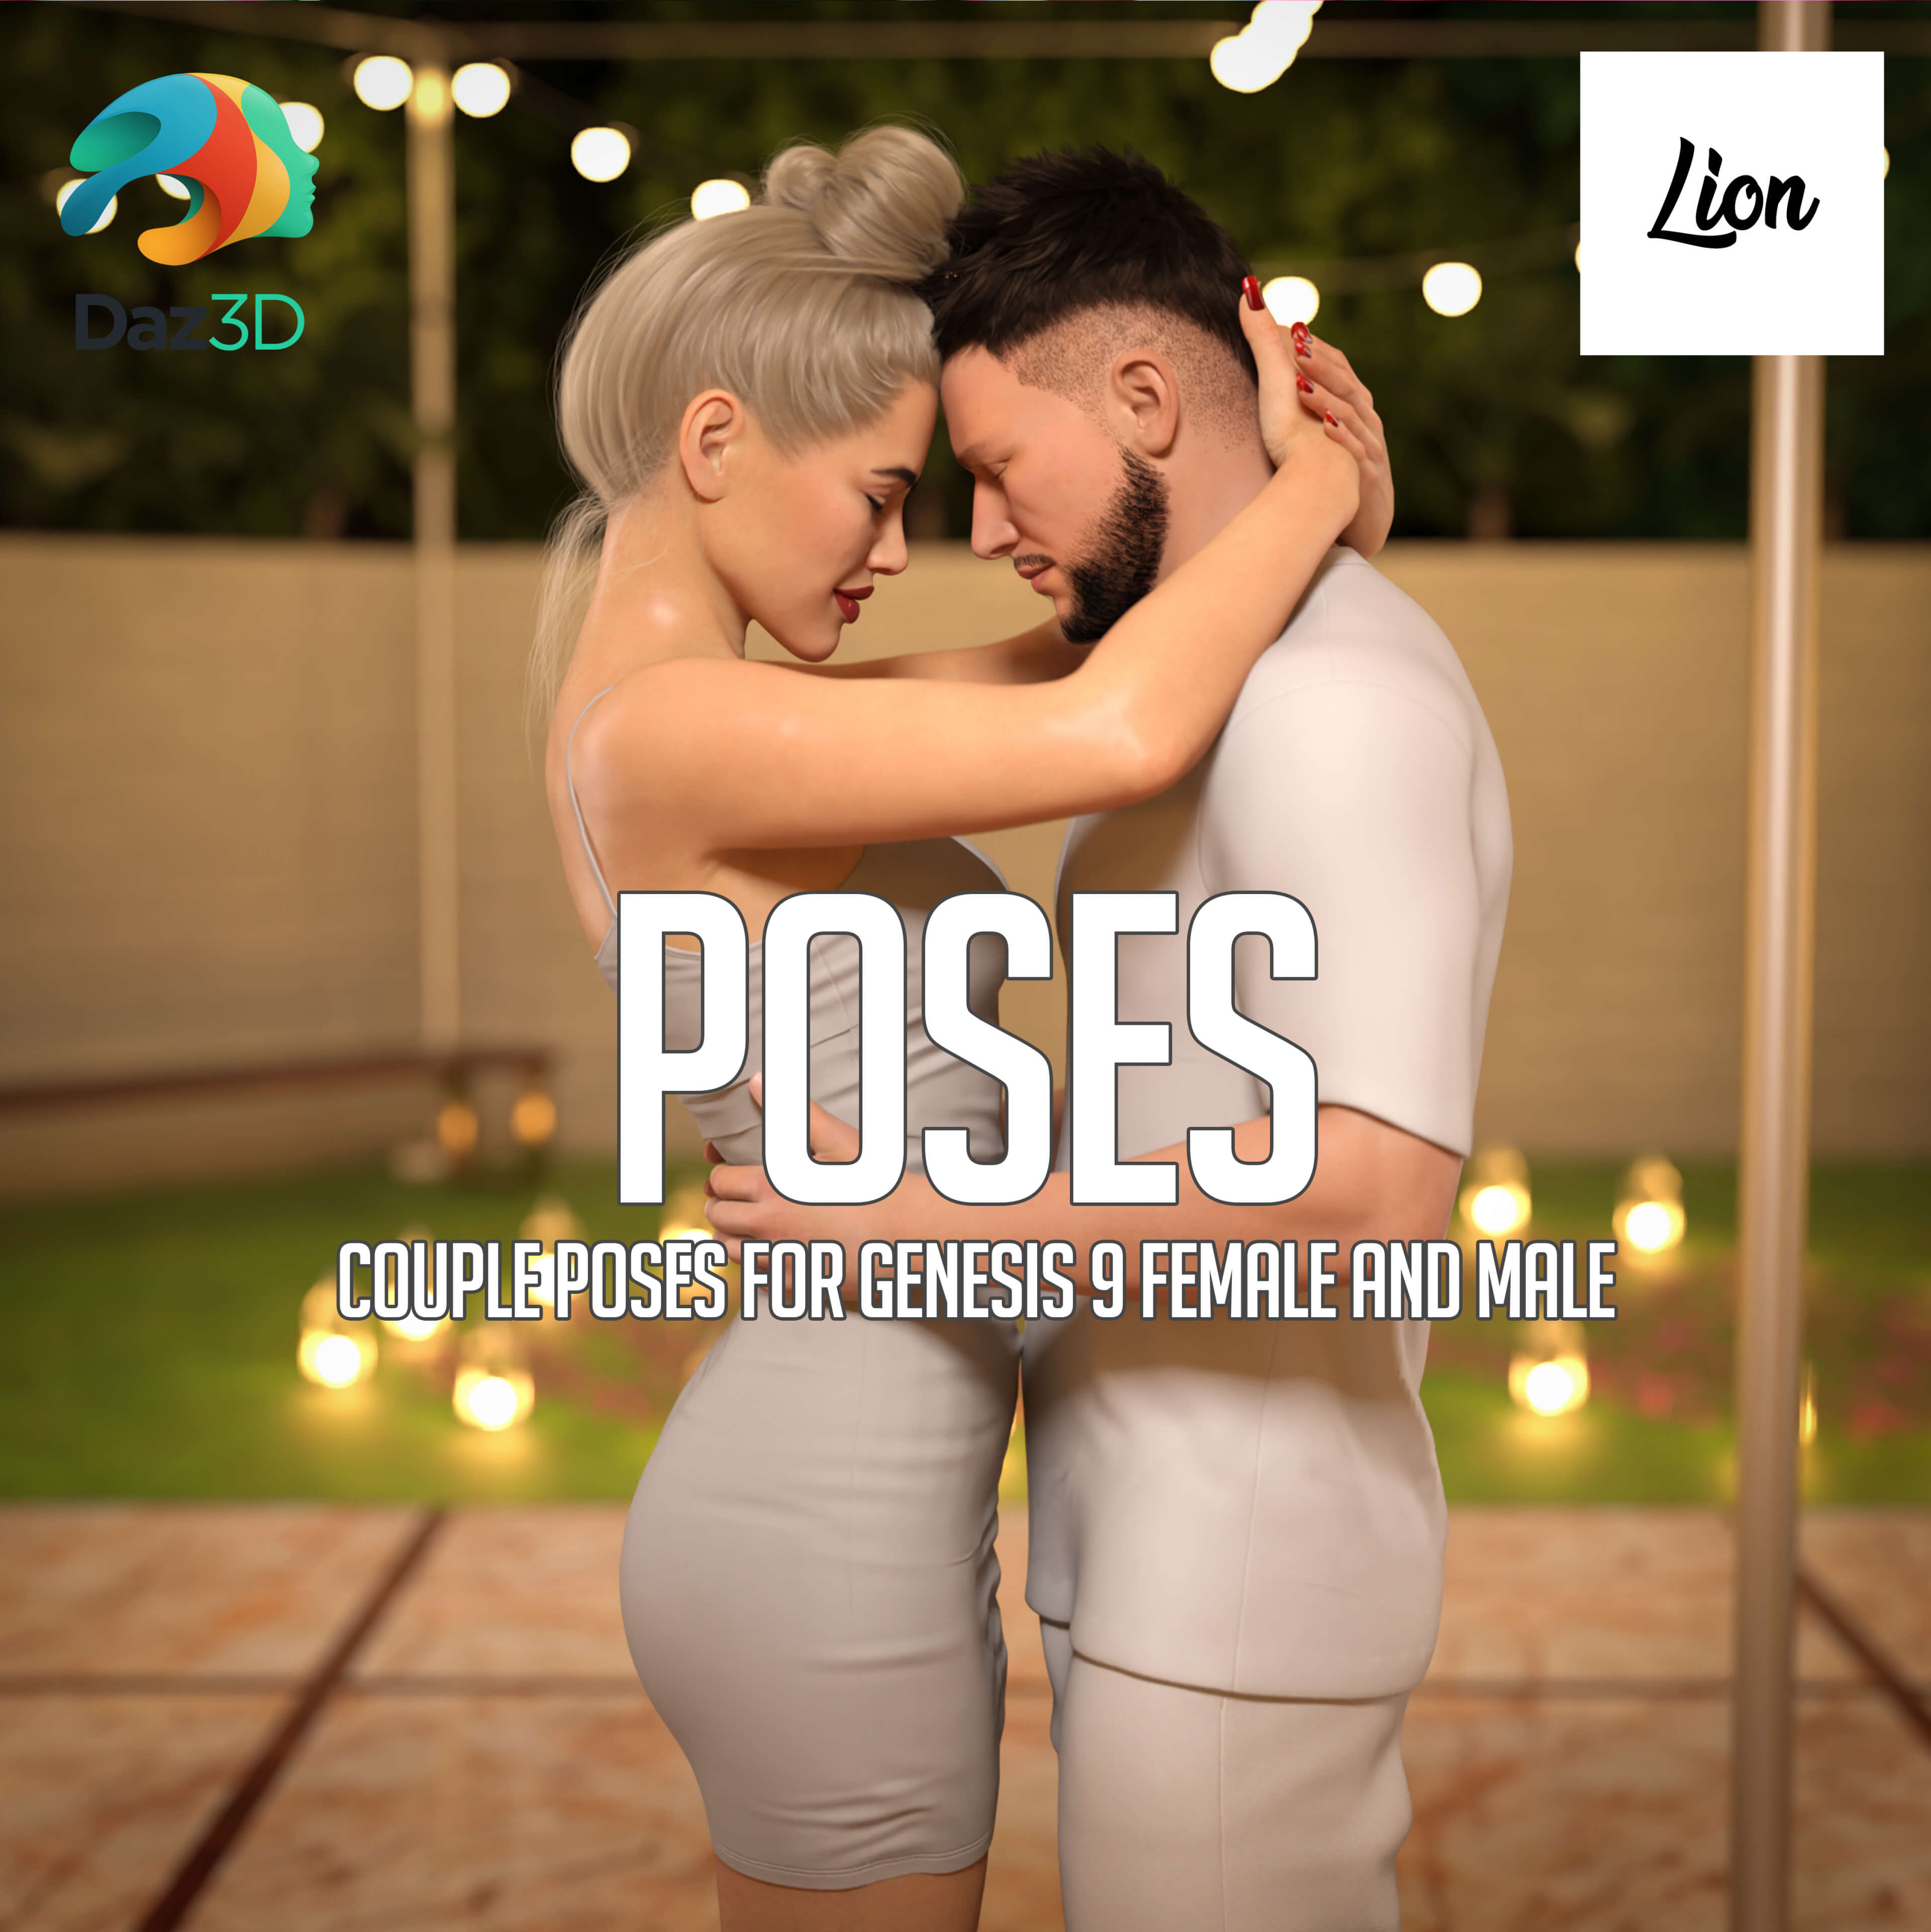 couple poses for genesis 9 female and male 01 HCXot3bI